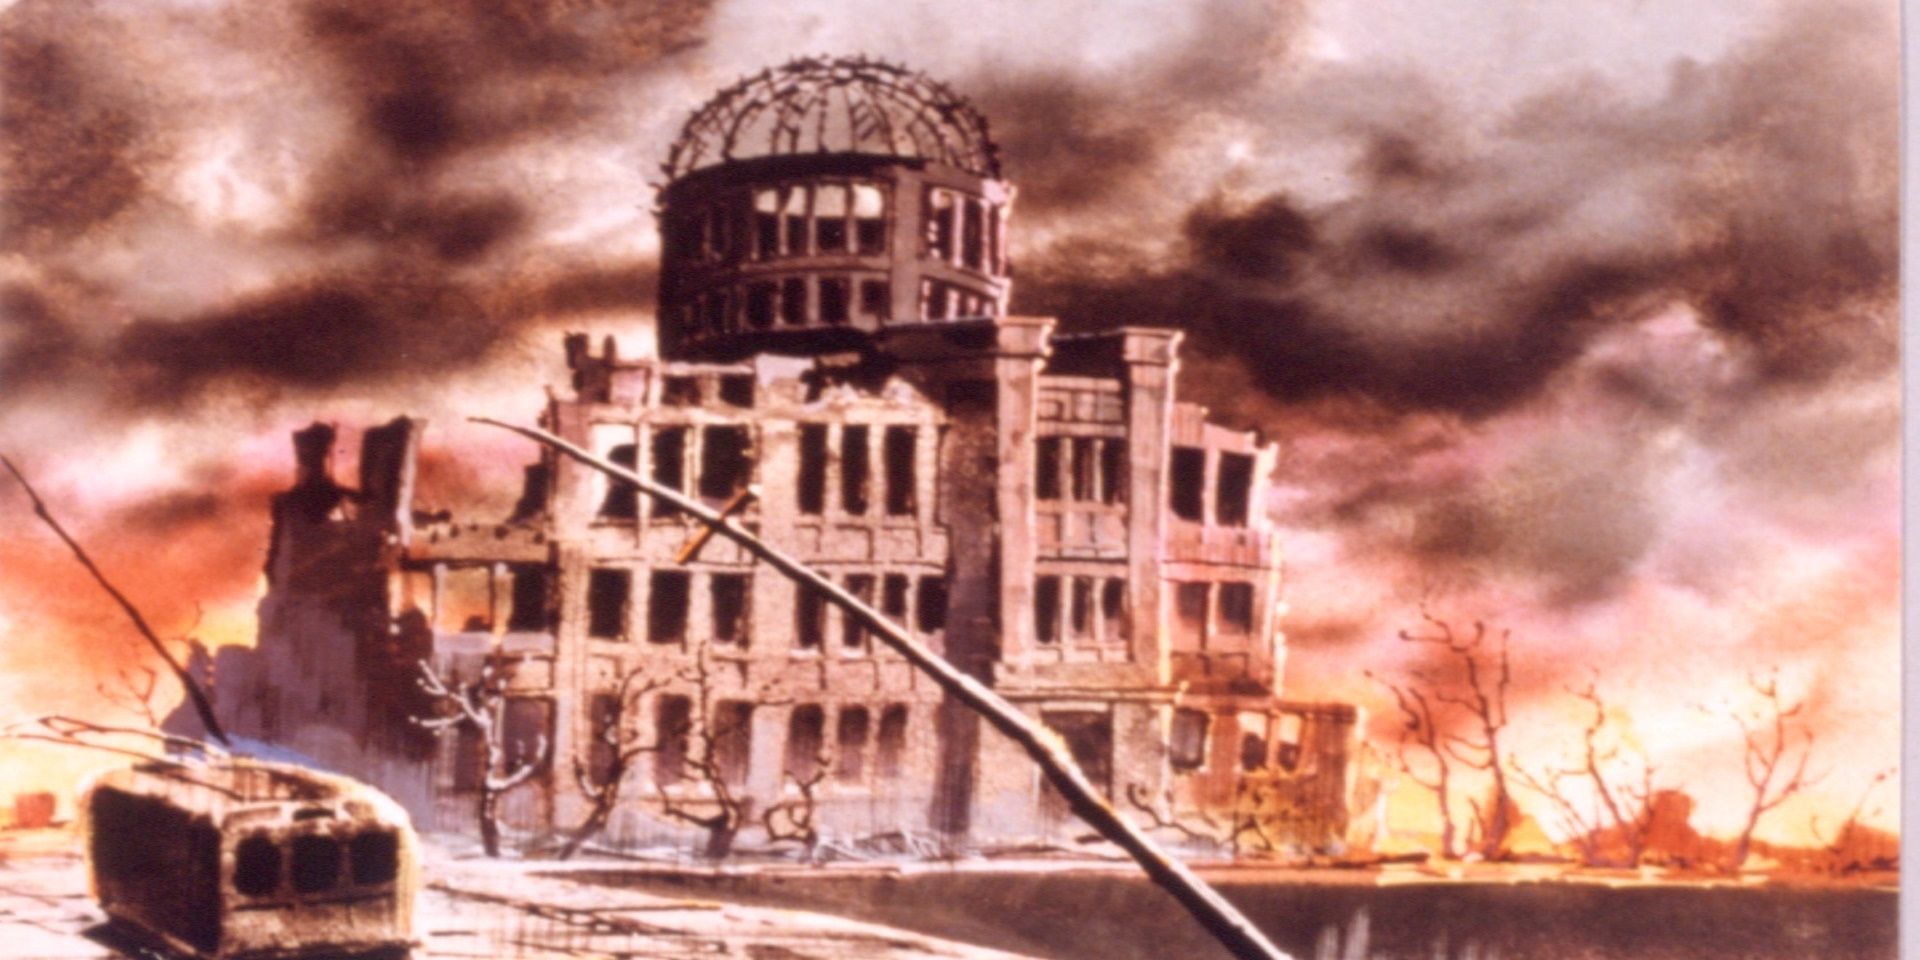 Image from the Barefoot Gen animated movie: A drawn still image of the Hiroshima Prefectural Industrial Promotion Hall freshly destroyed following the nuclear bombing, standing amid a smoky sky.